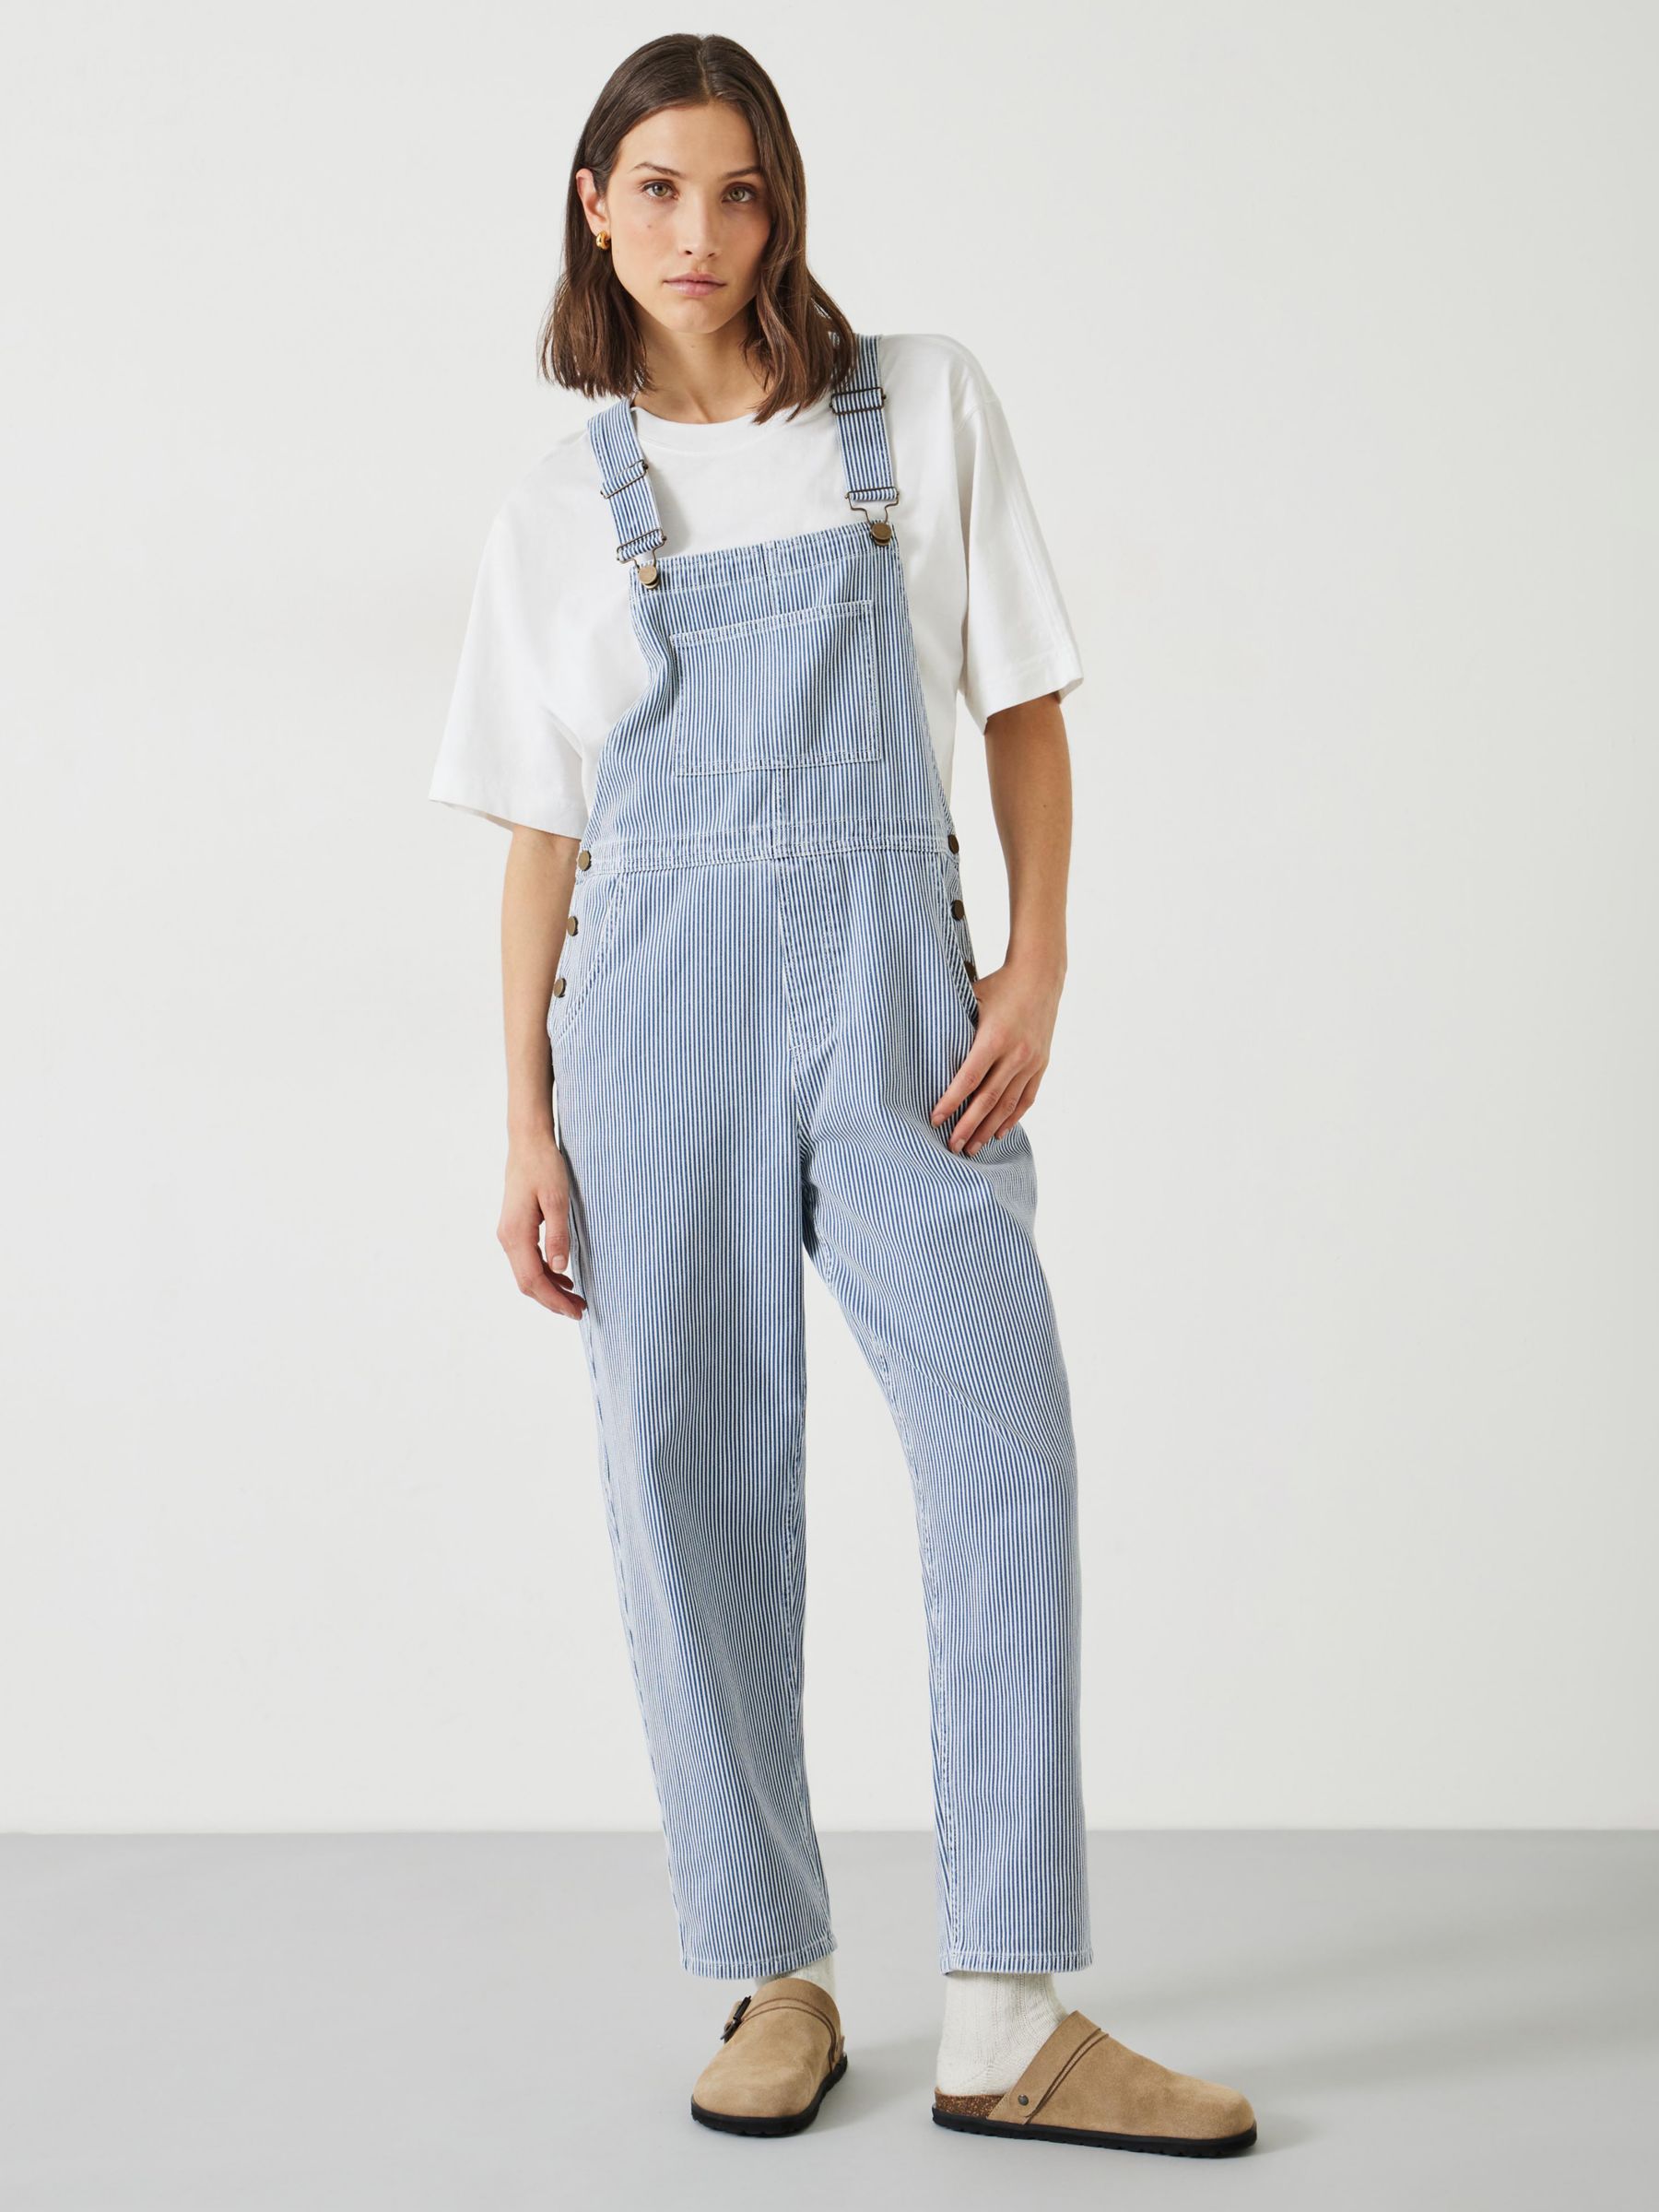 Women's Jumpsuits & Playsuits - Dungarees